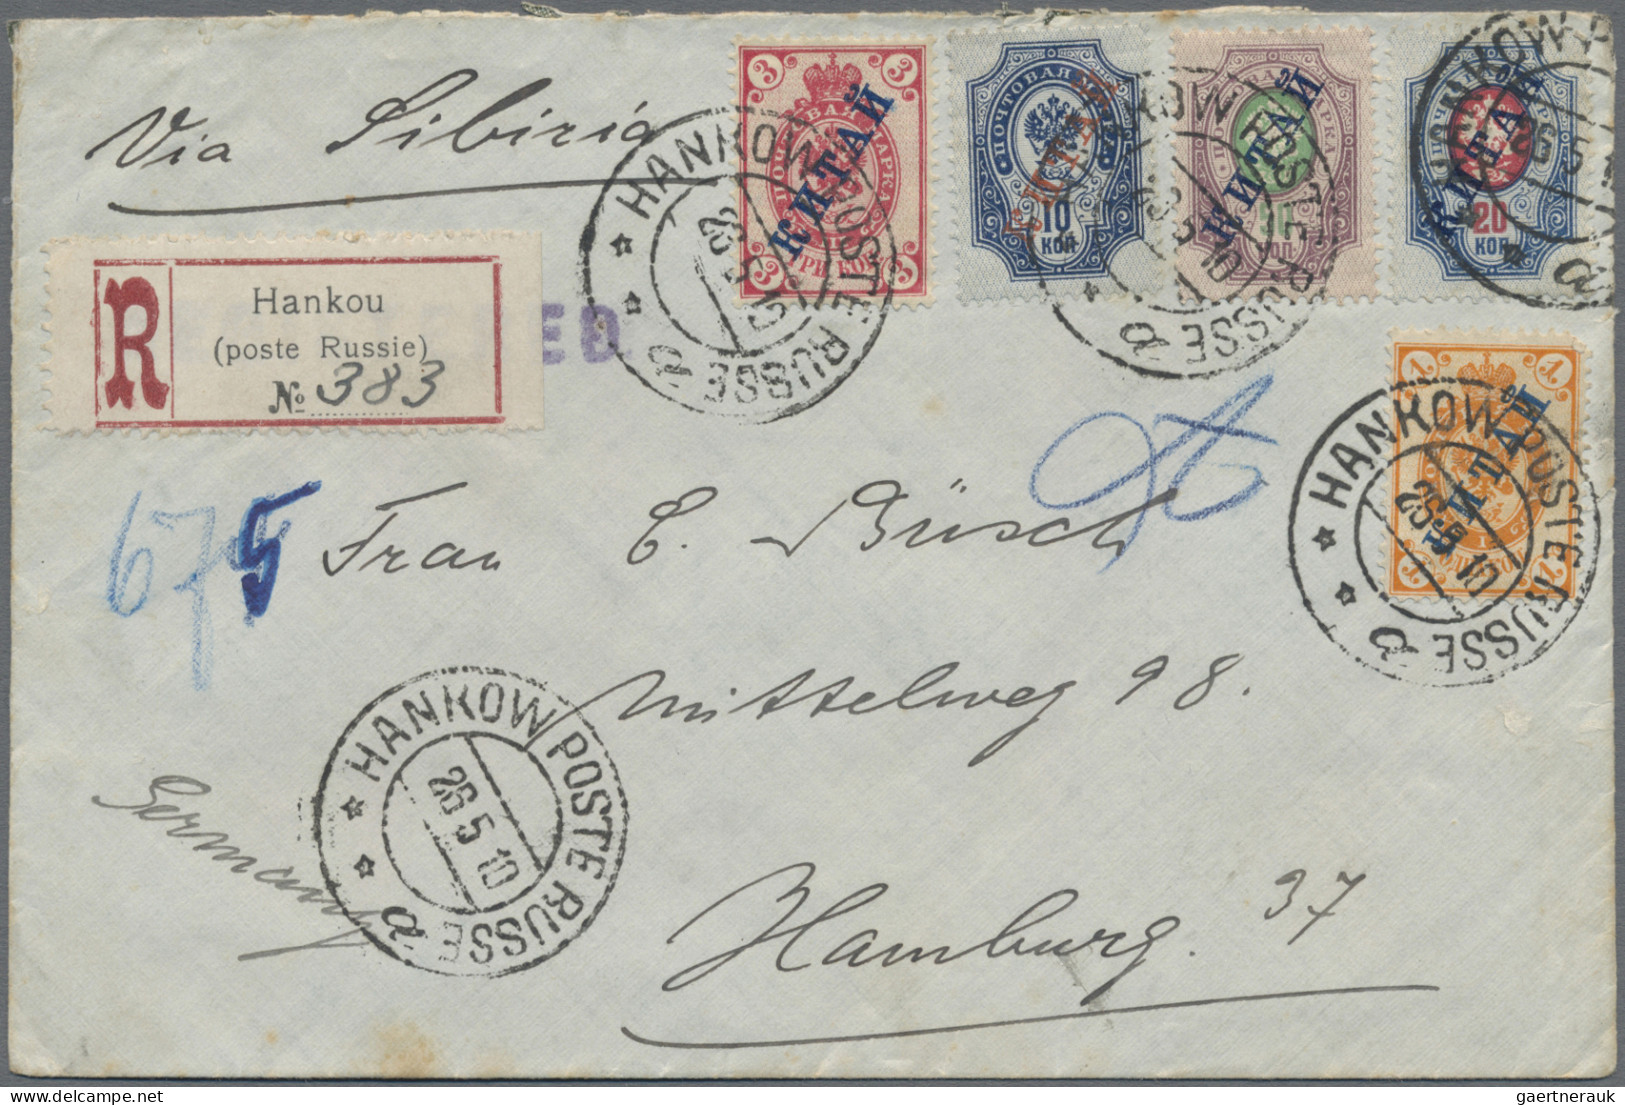 Russian Post In China: 1910 Registered Cover From Hankou To Hamburg, Germany 'vi - China